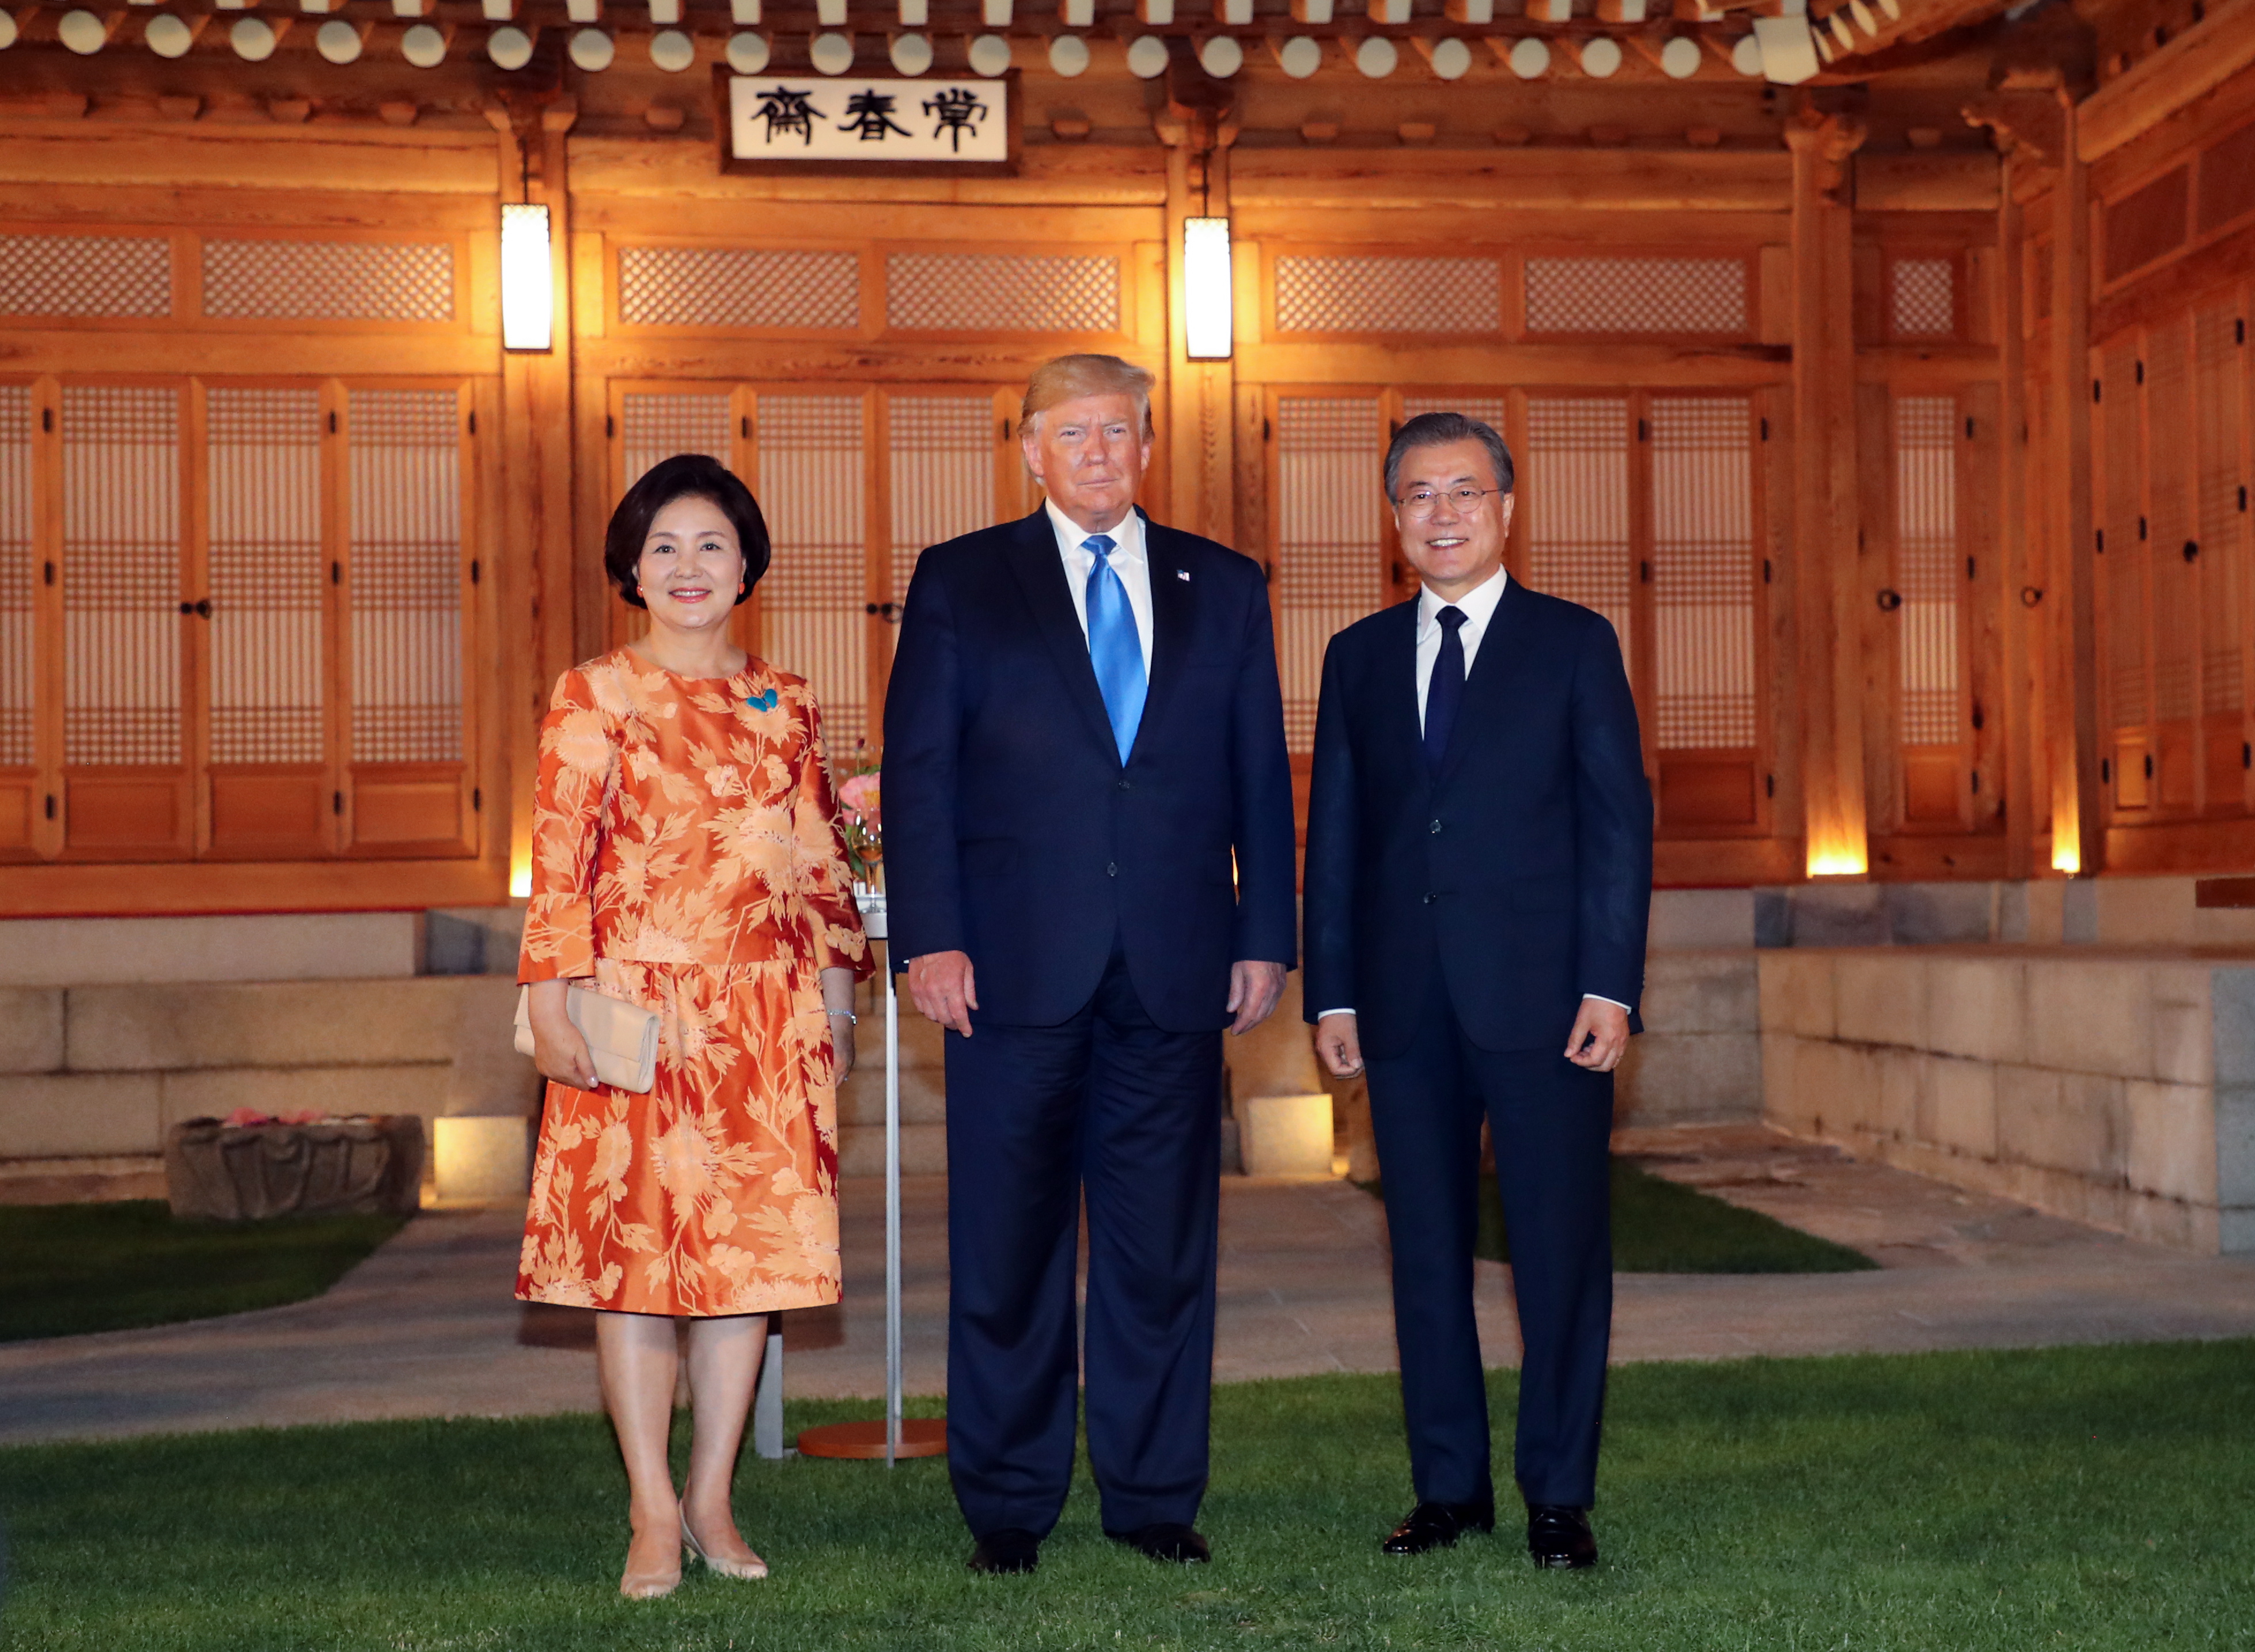 epa07682496 South Korean President Moon Jae-in (R) and his wife, Kim Jung-sook (L), pose for a photo with US President Donald J. Trump (C) before a welcome dinner at the presidential office Cheong Wa Dae in Seoul, South Korea, 29 June 2019. The US leader arrived earlier in the day on a two-day visit that will include a summit with South Korean President Moon and a possible trip to the Demilitarized Zone (DMZ) that divides the two Koreas.  EPA/YONHAP SOUTH KOREA OUT